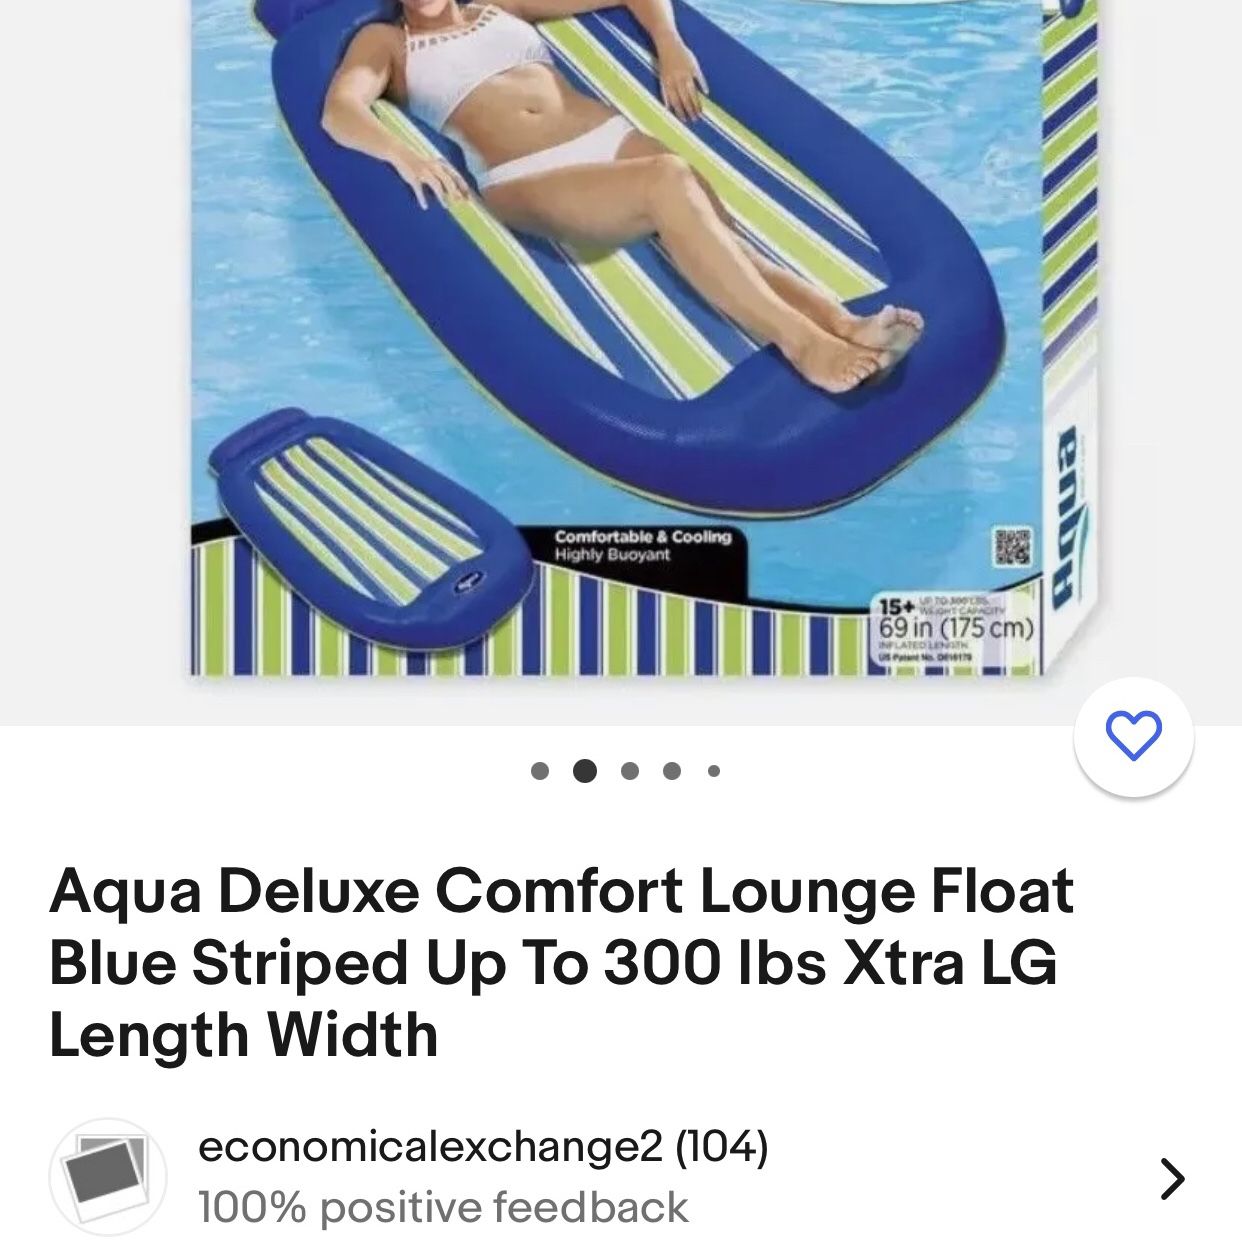 Aqua Deluxe Comfort Lounge Float Blue Striped Up To 300 lbs Xtra LG Length Width